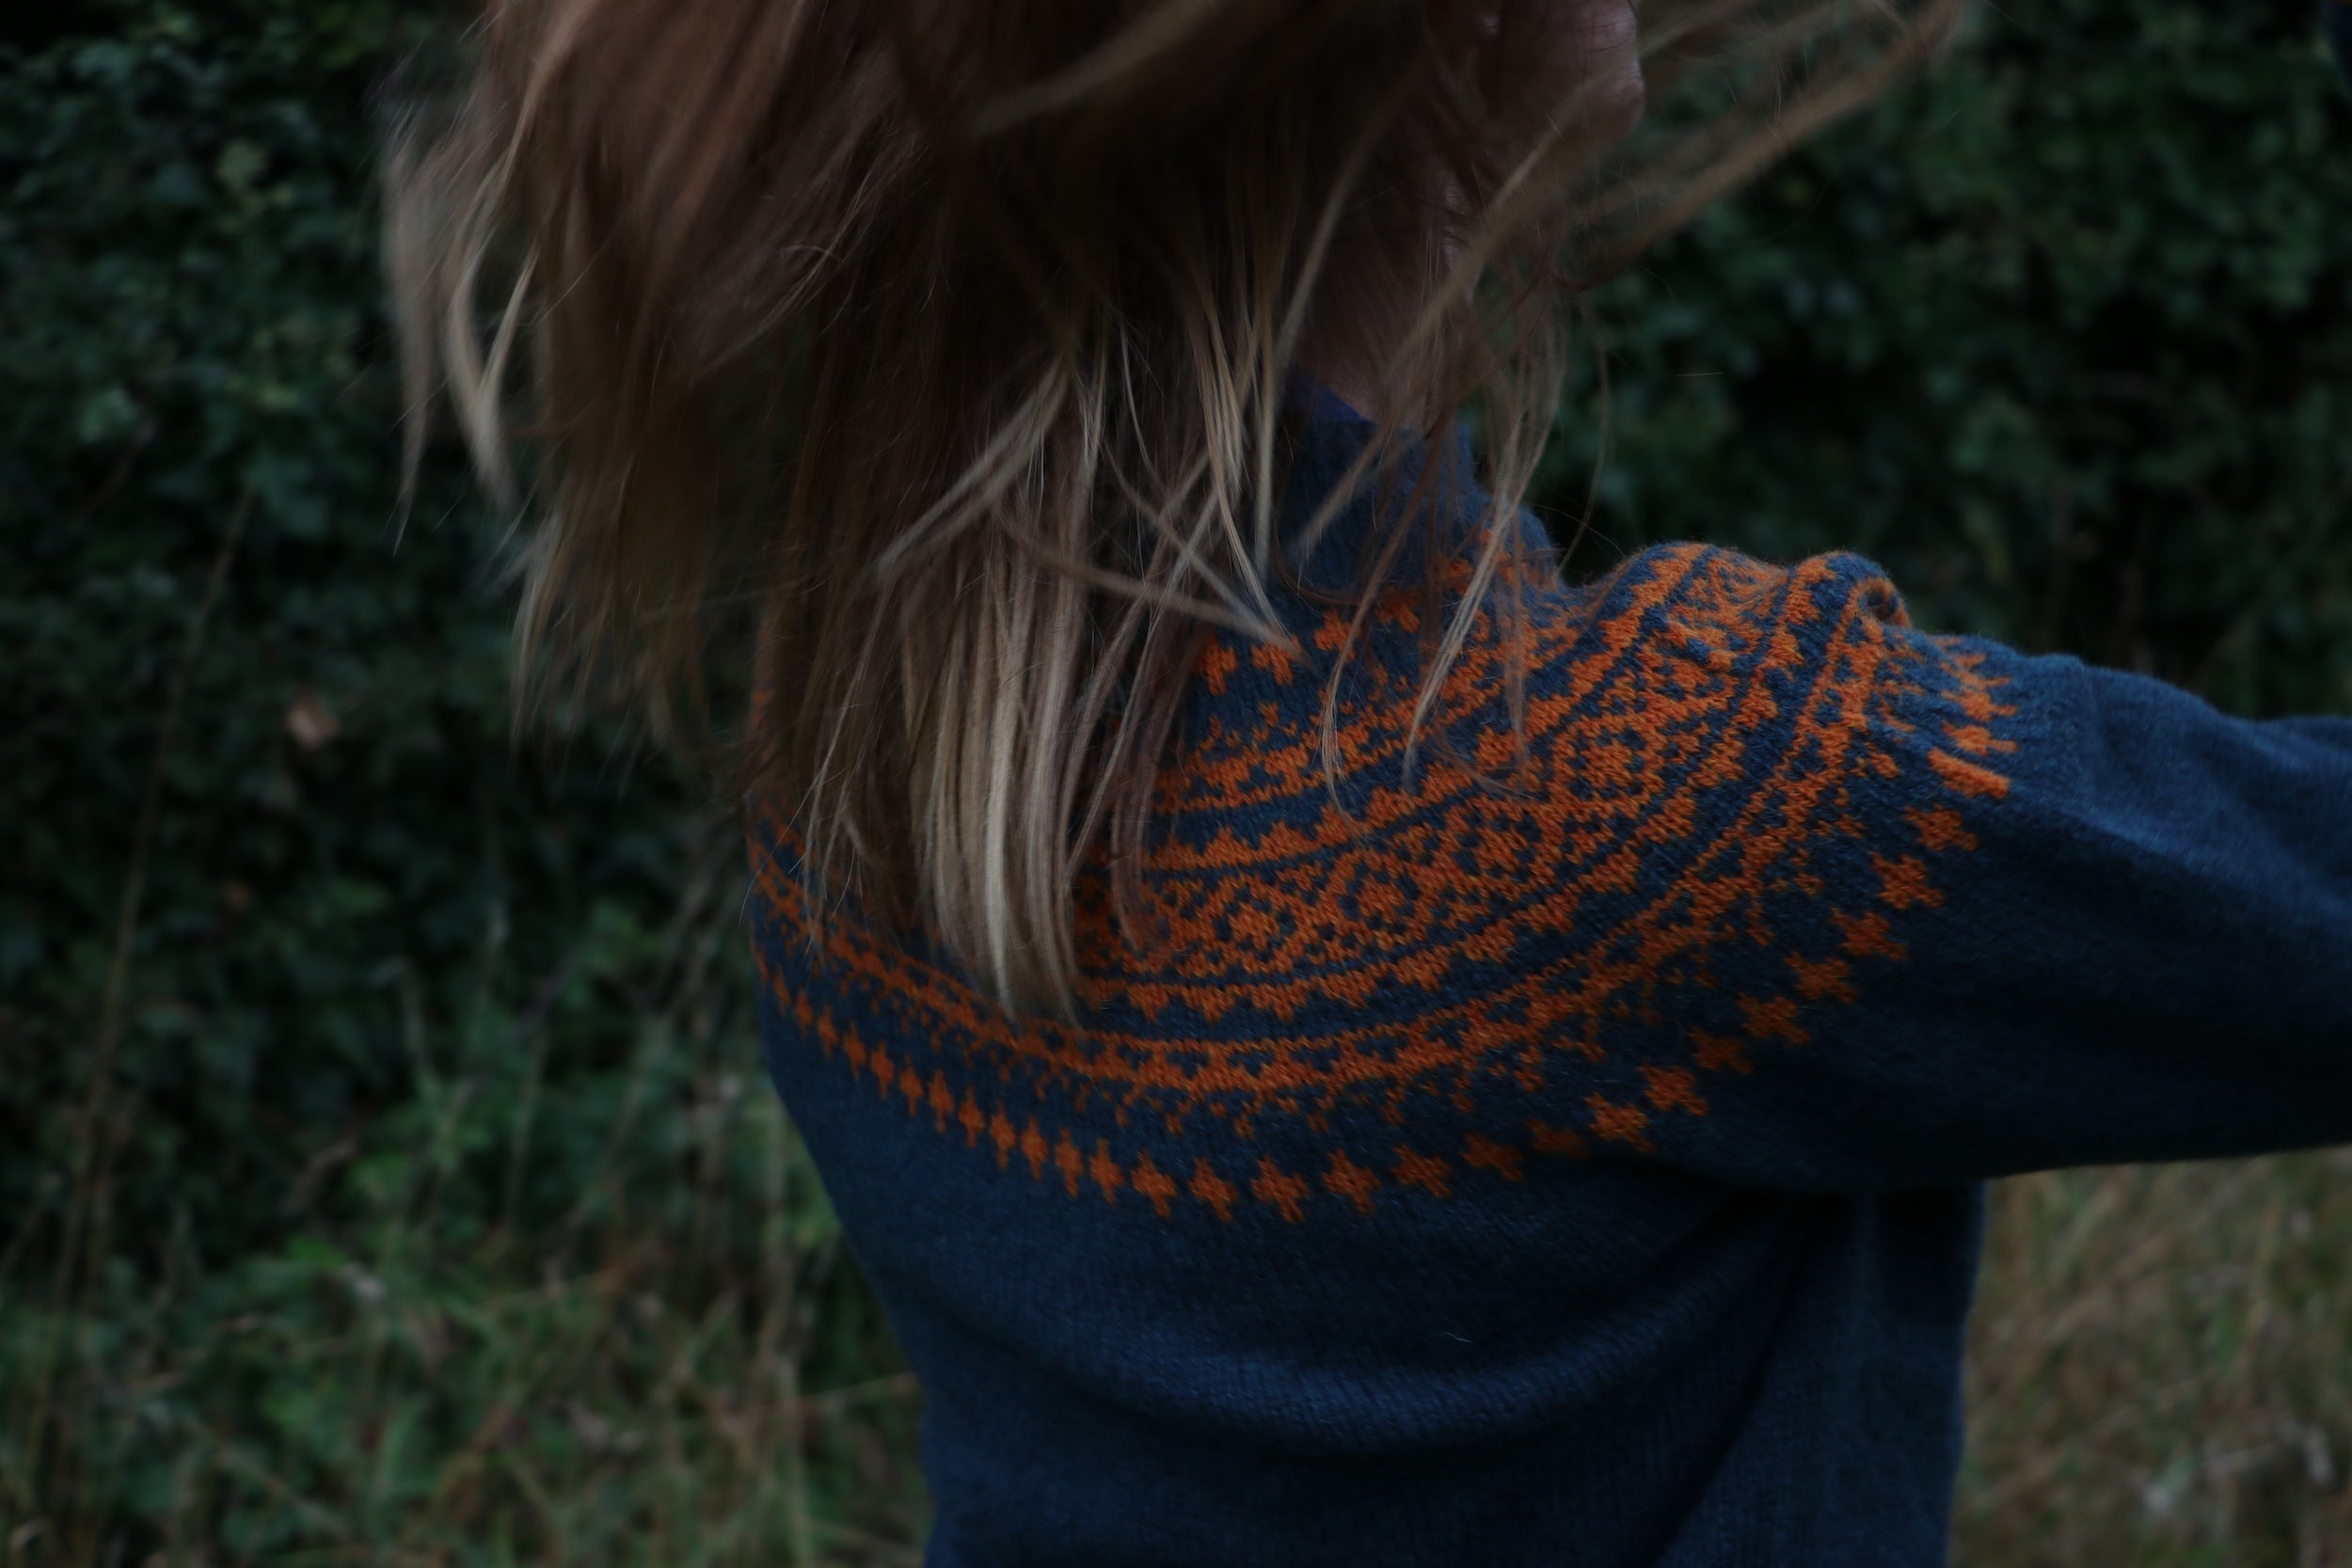 Woman wearing Carrier Company Shetland Lambswool Yoke Jumper in Ginger and Teal with tan Women's Work Trouser